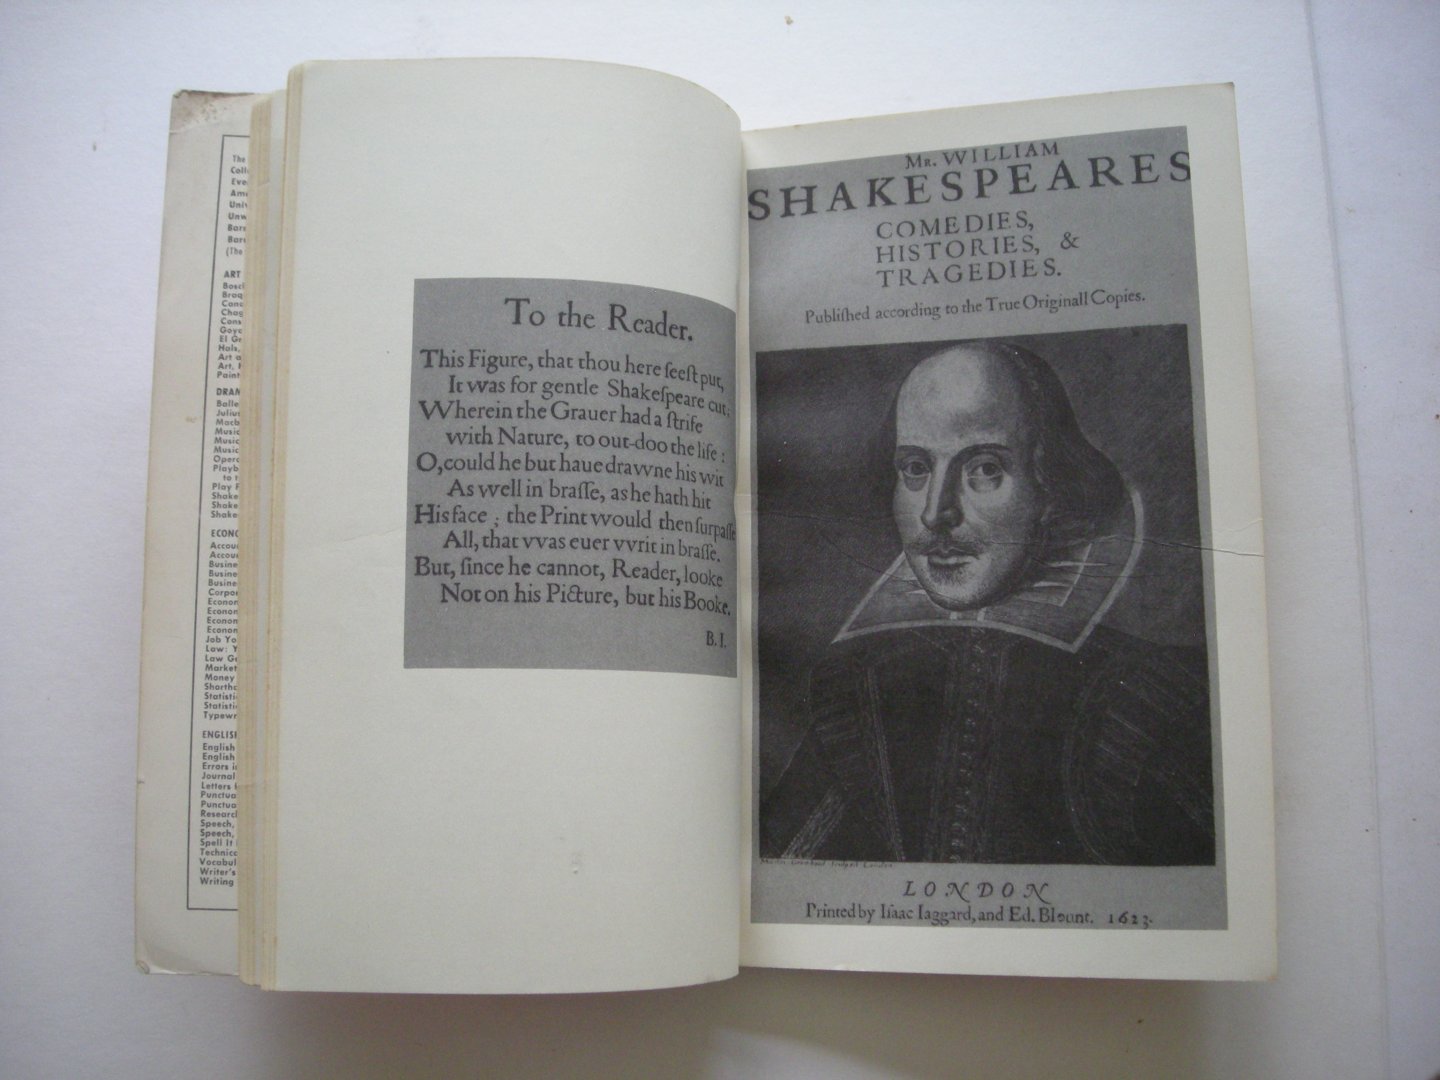 Watt, H.A., Holzknecht,K.J. & Ross, R. - Outlines of Shakespeare's plays, Synopses,Background Material,Genealogical charts